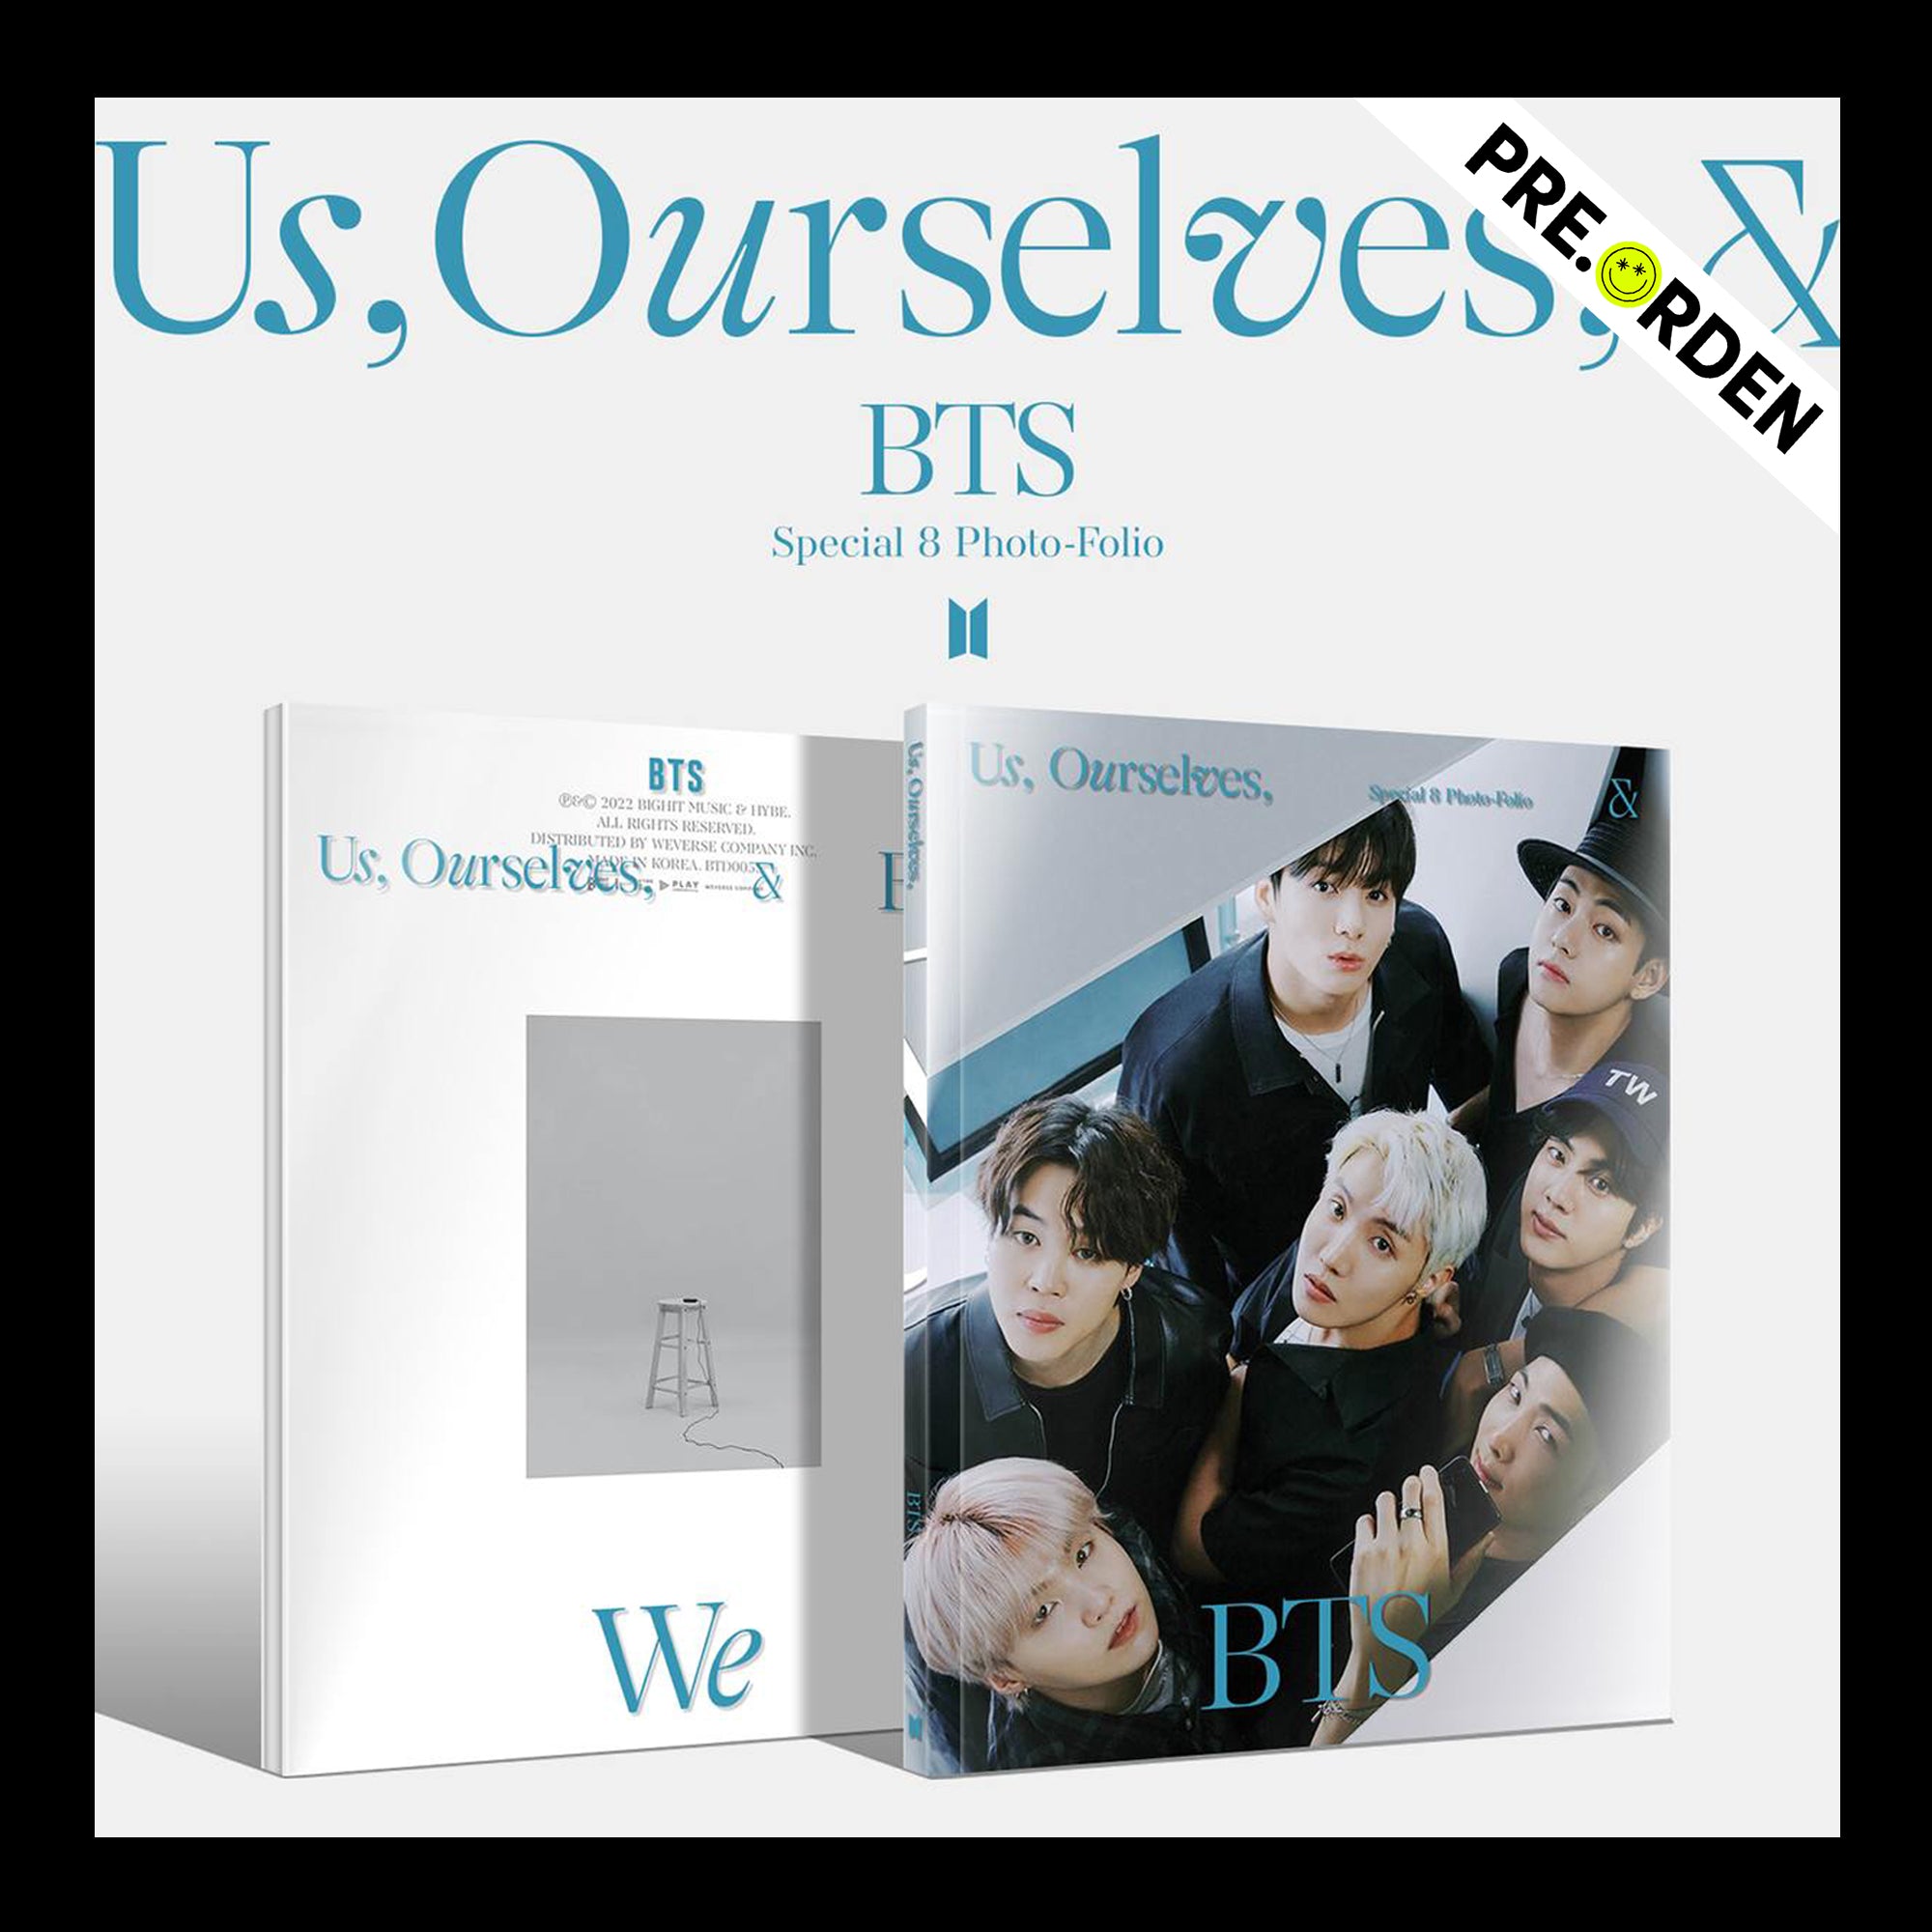 BTS - Special 8 Photo-Folio (Us, Ourselves, And BTS 'WE')